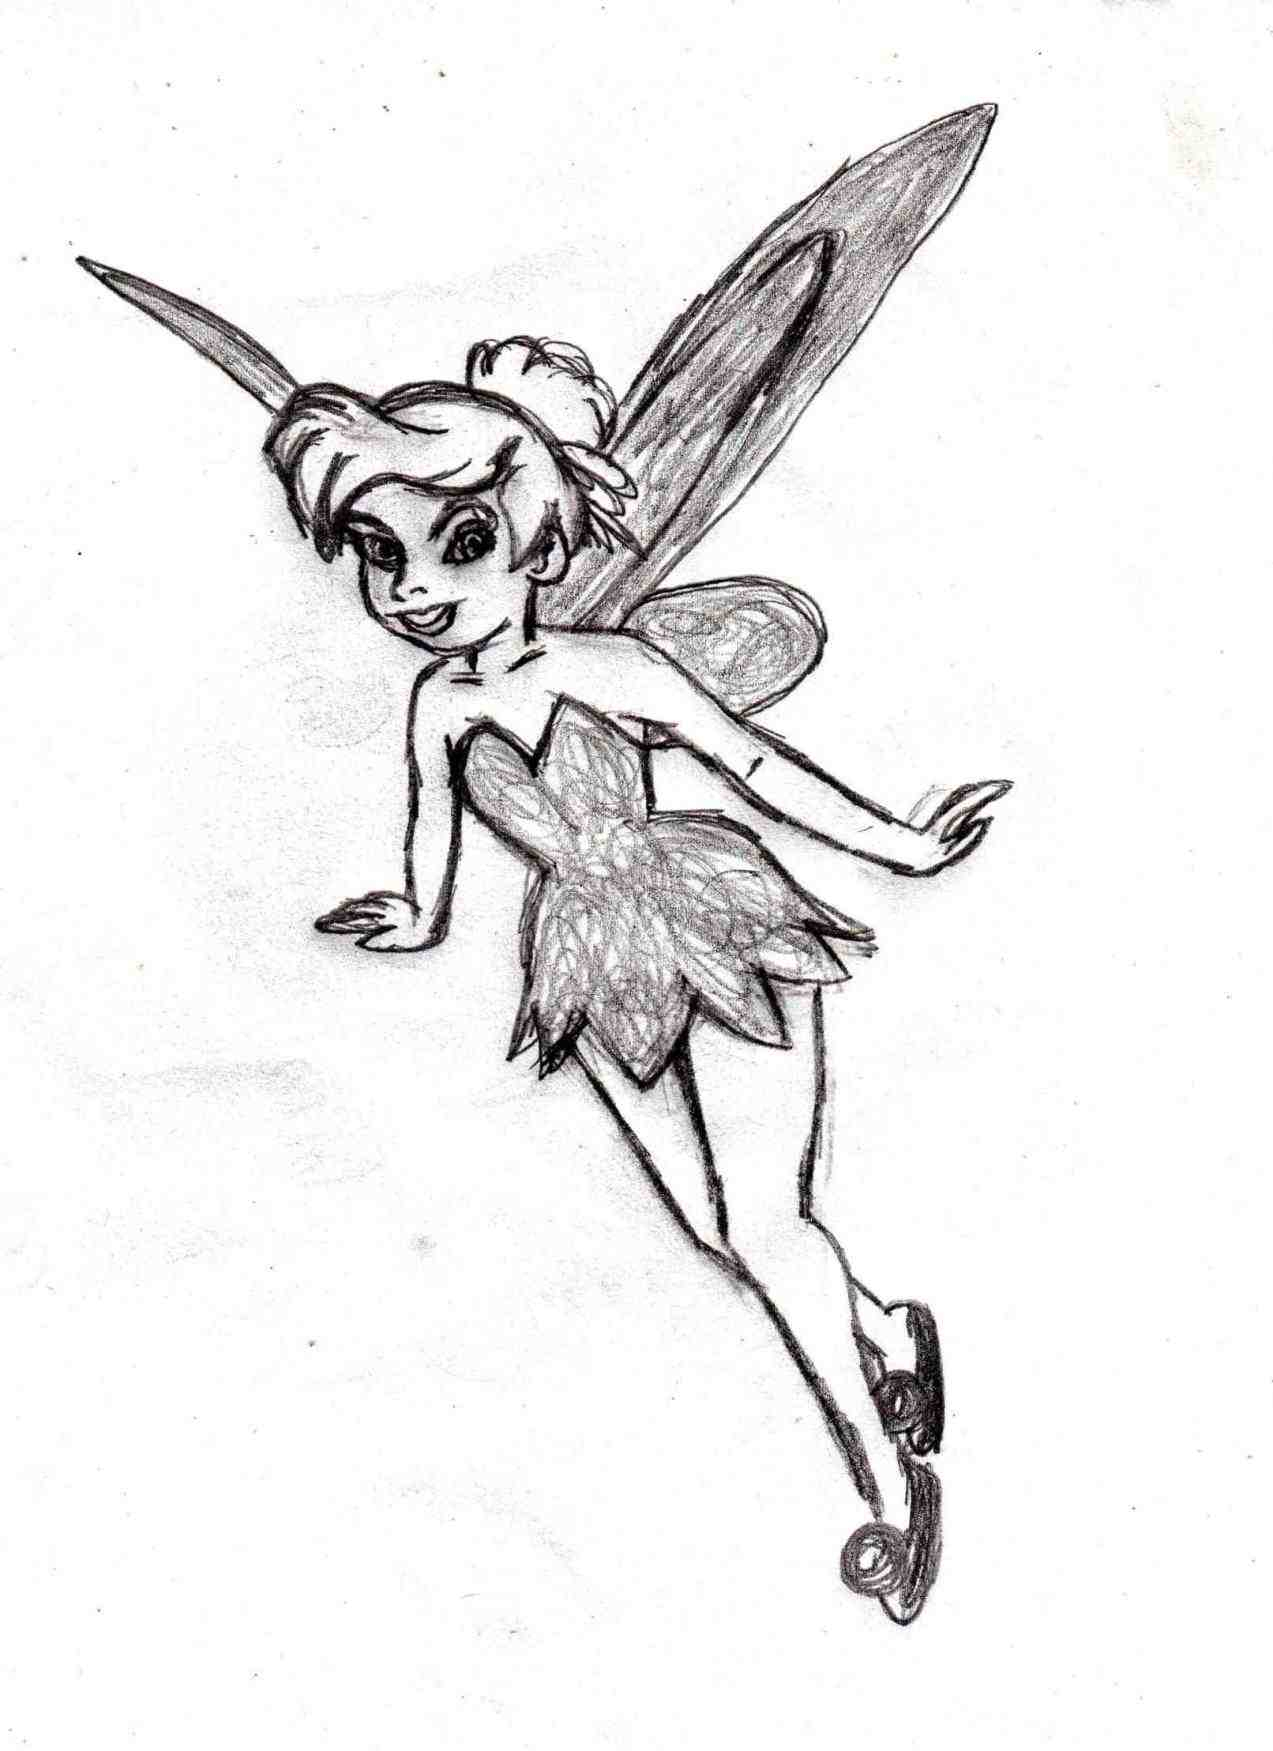 1273x1751 Pencil Drawings Of Tinkerbell Pencil Sketches Of Tinkerbell Penci...